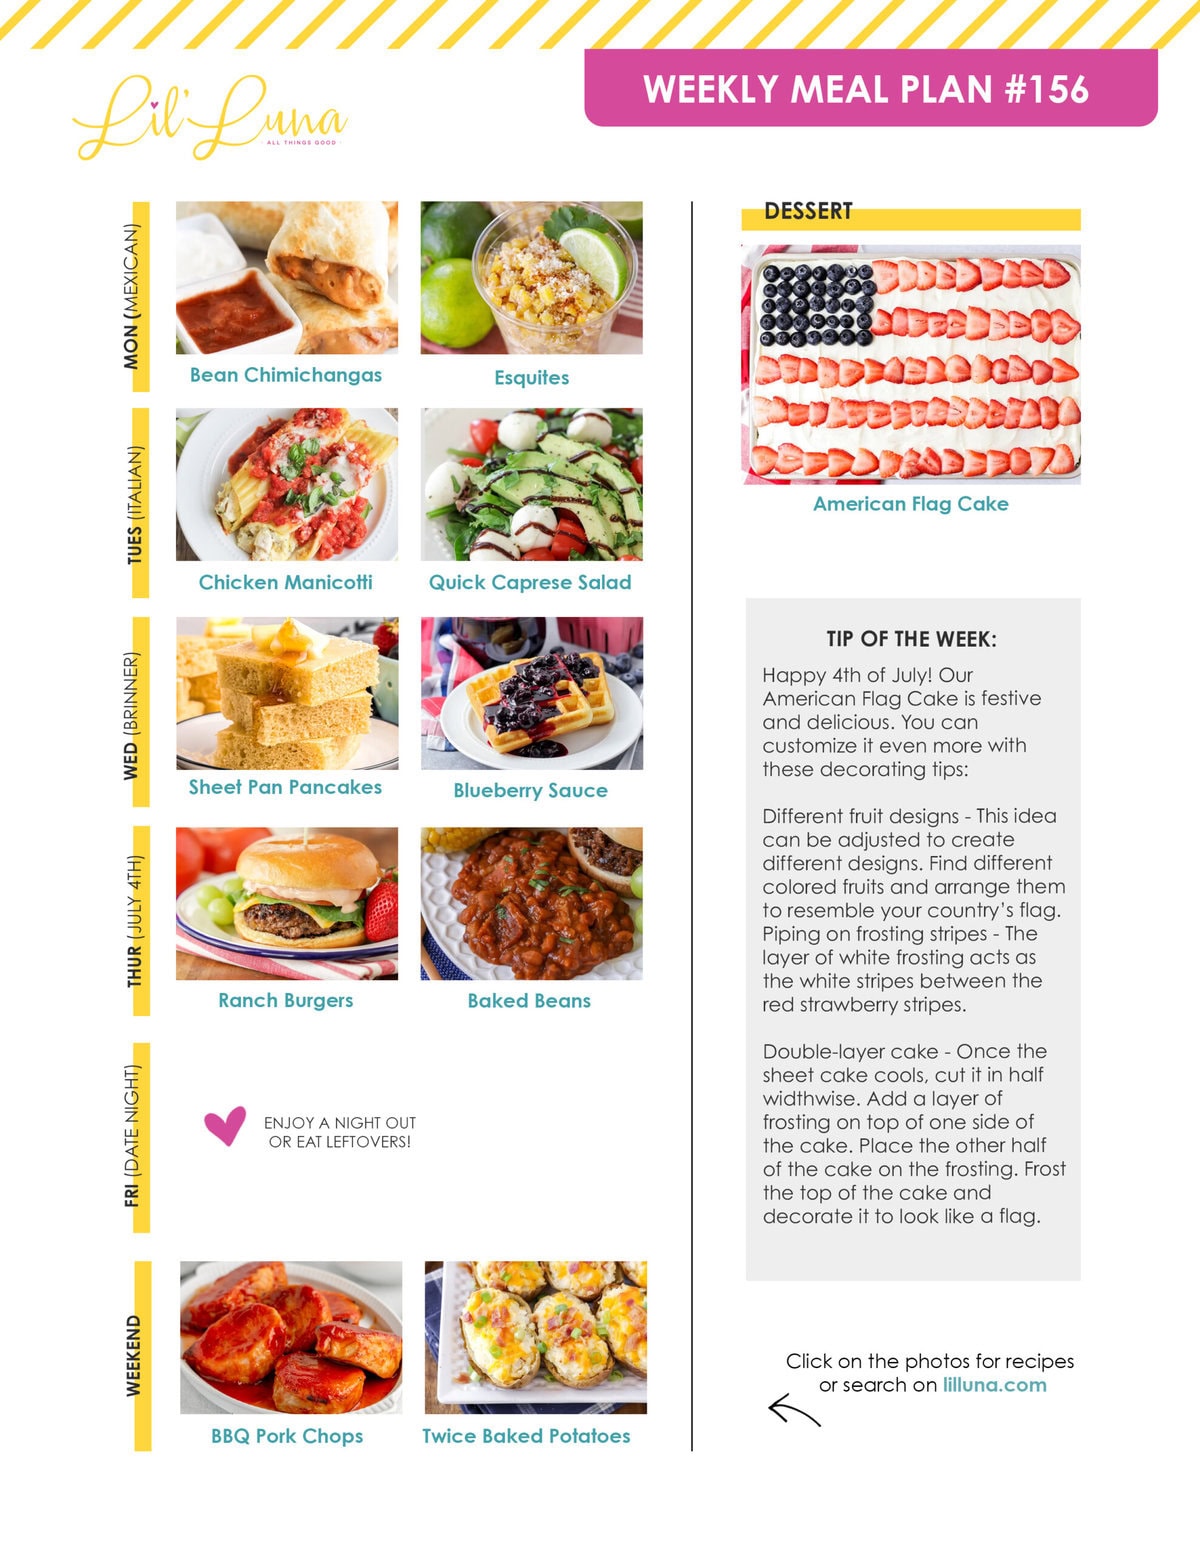 Meal plan 156 graphic.